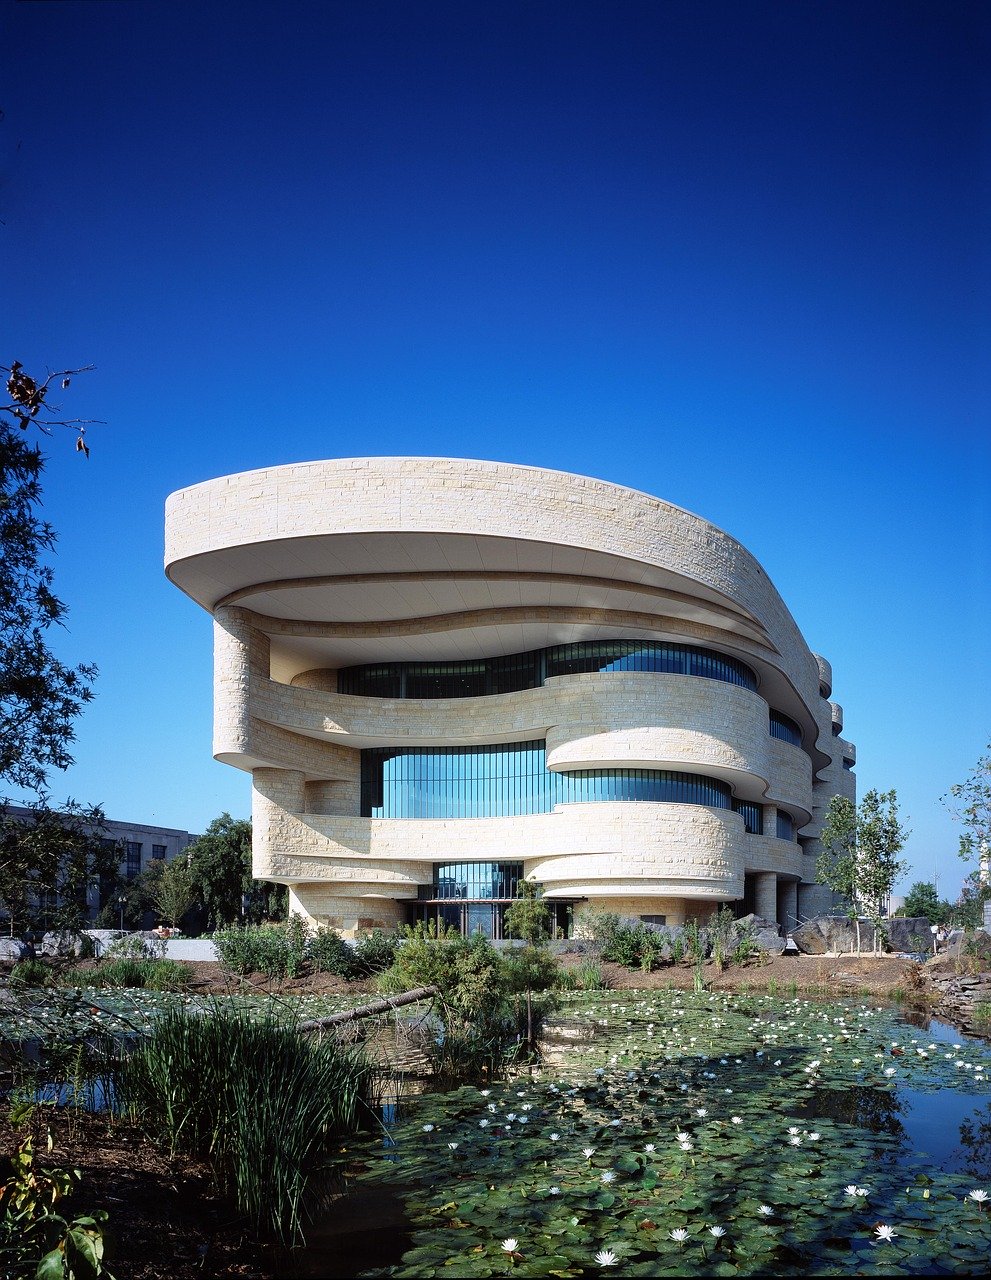 National Museum of the American Indian is one of the interesting Smithsonian museums in Washington DC, USA